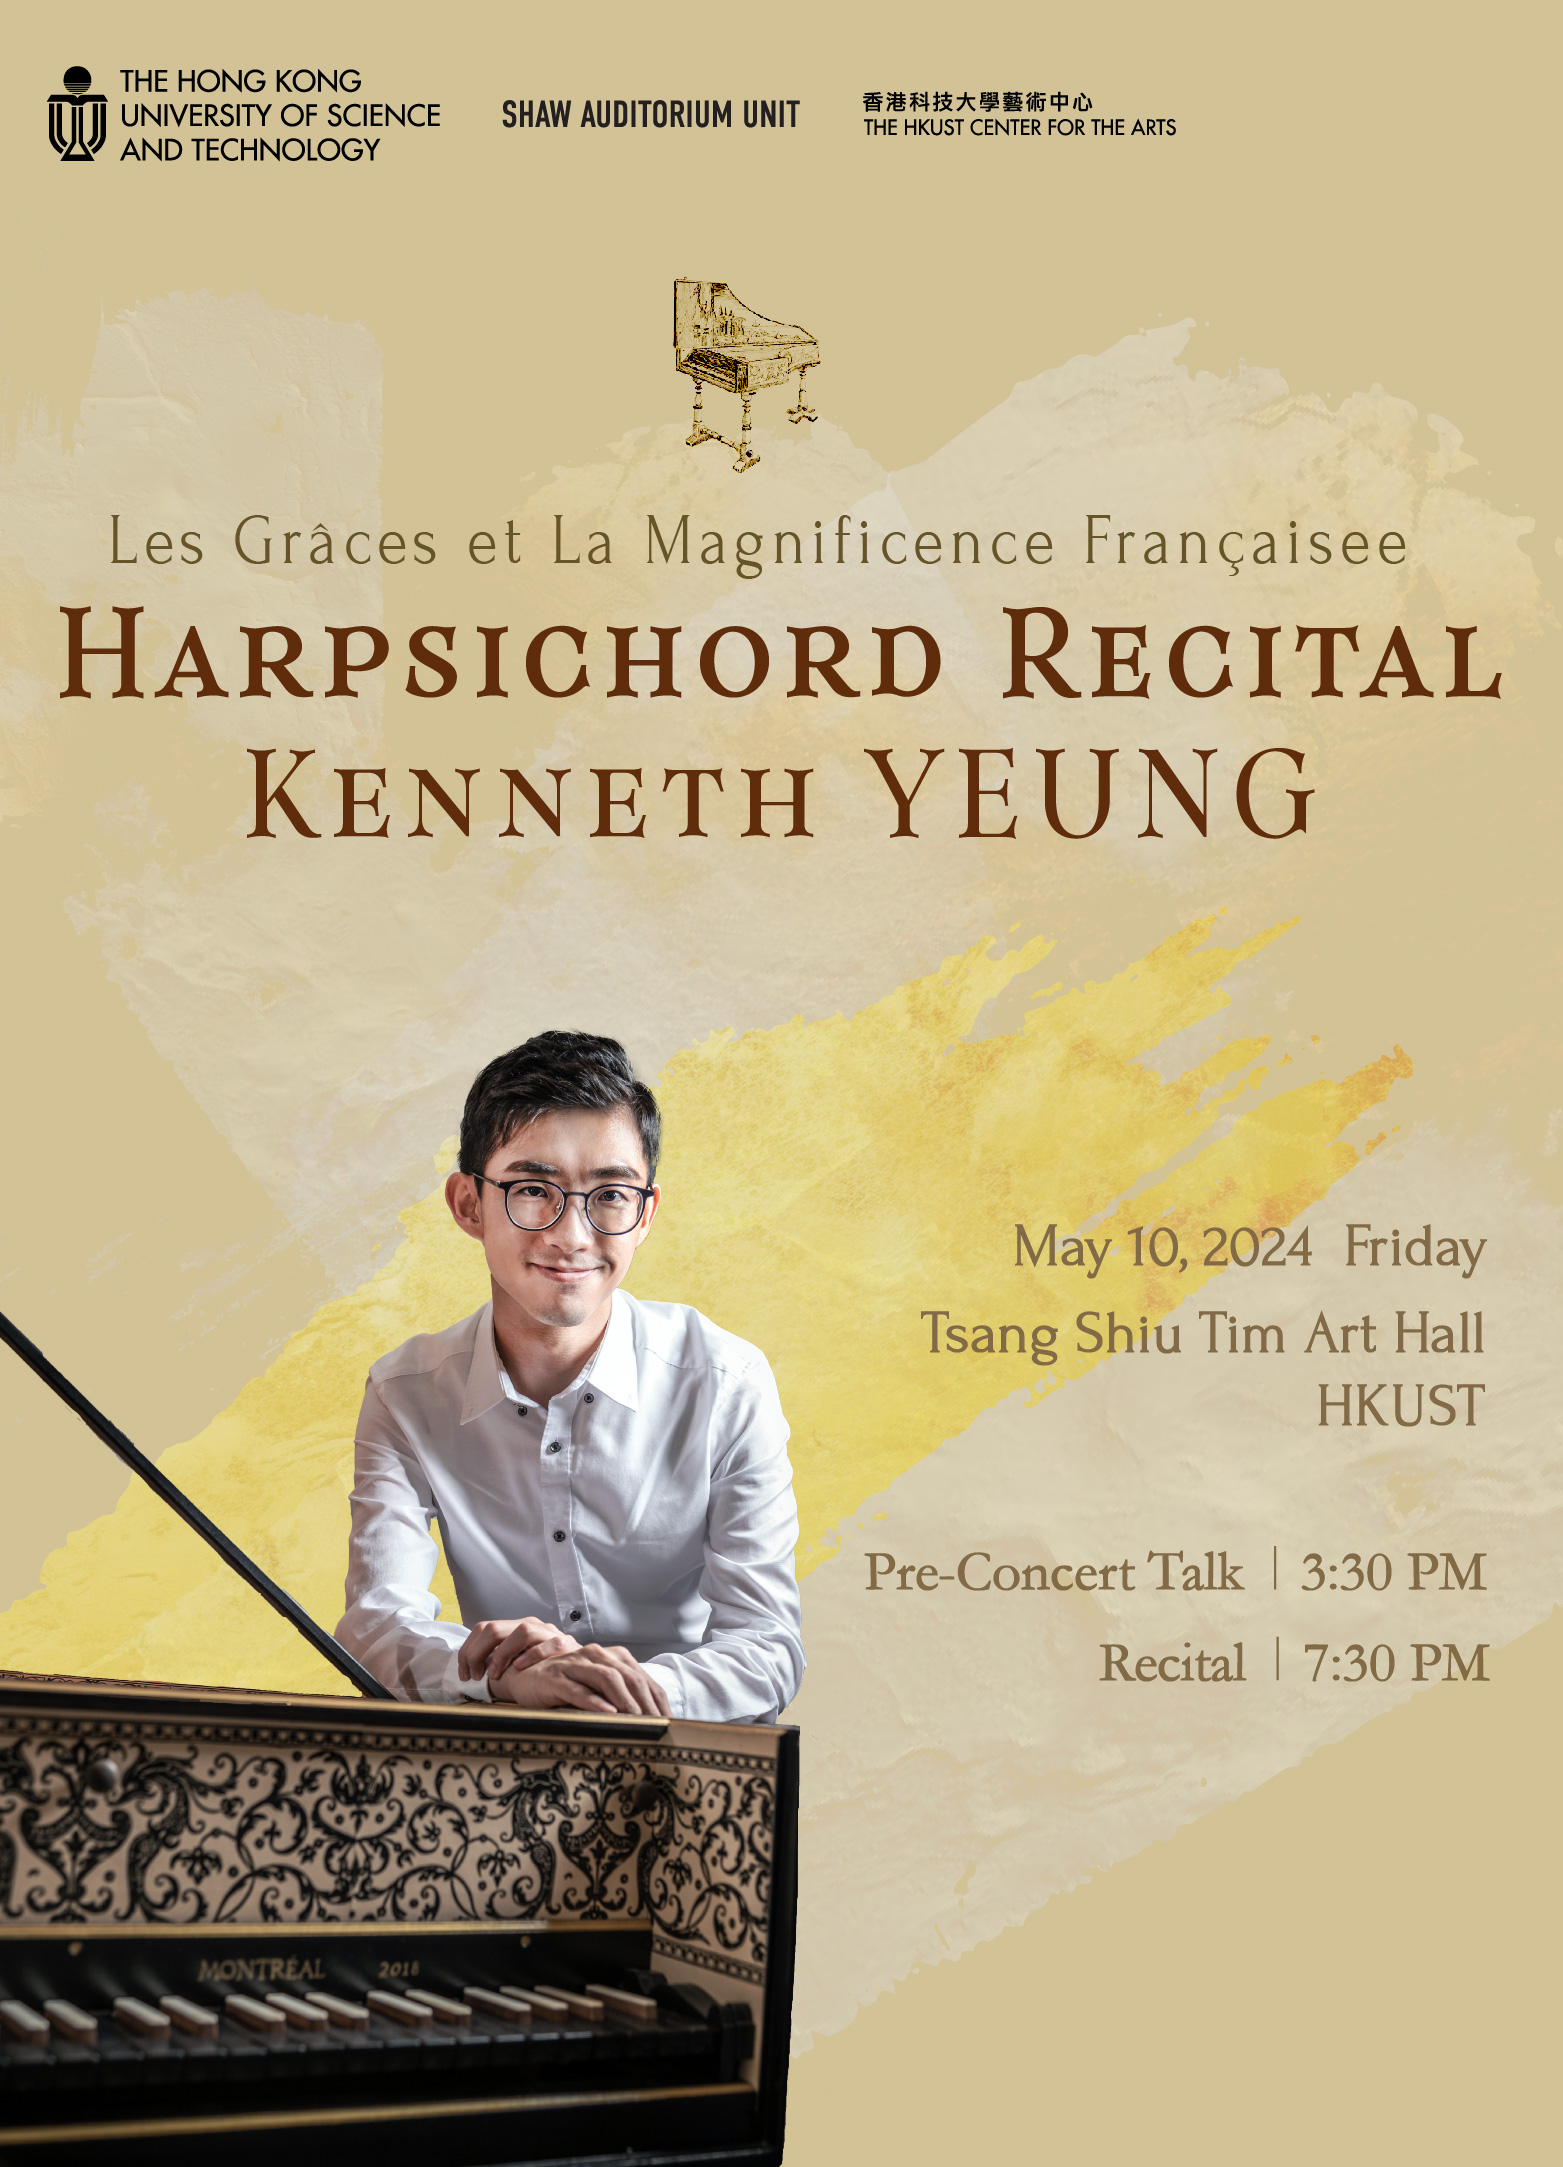 Harpsichord Recital by Kenneth YEUNG